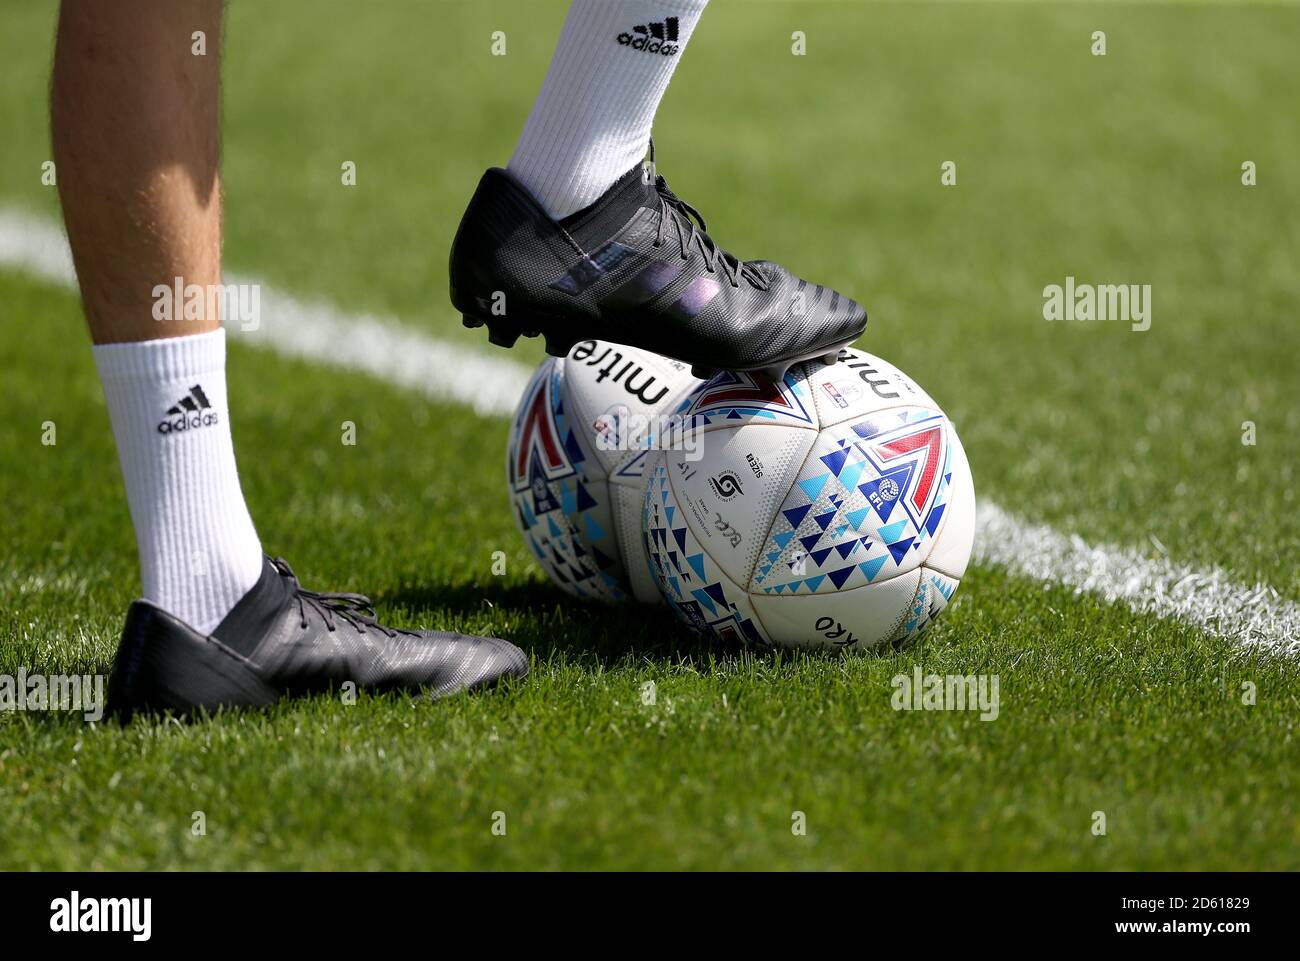 A detail view of a mitre football and adidas football boots and socks prior  to kick-off Stock Photo - Alamy